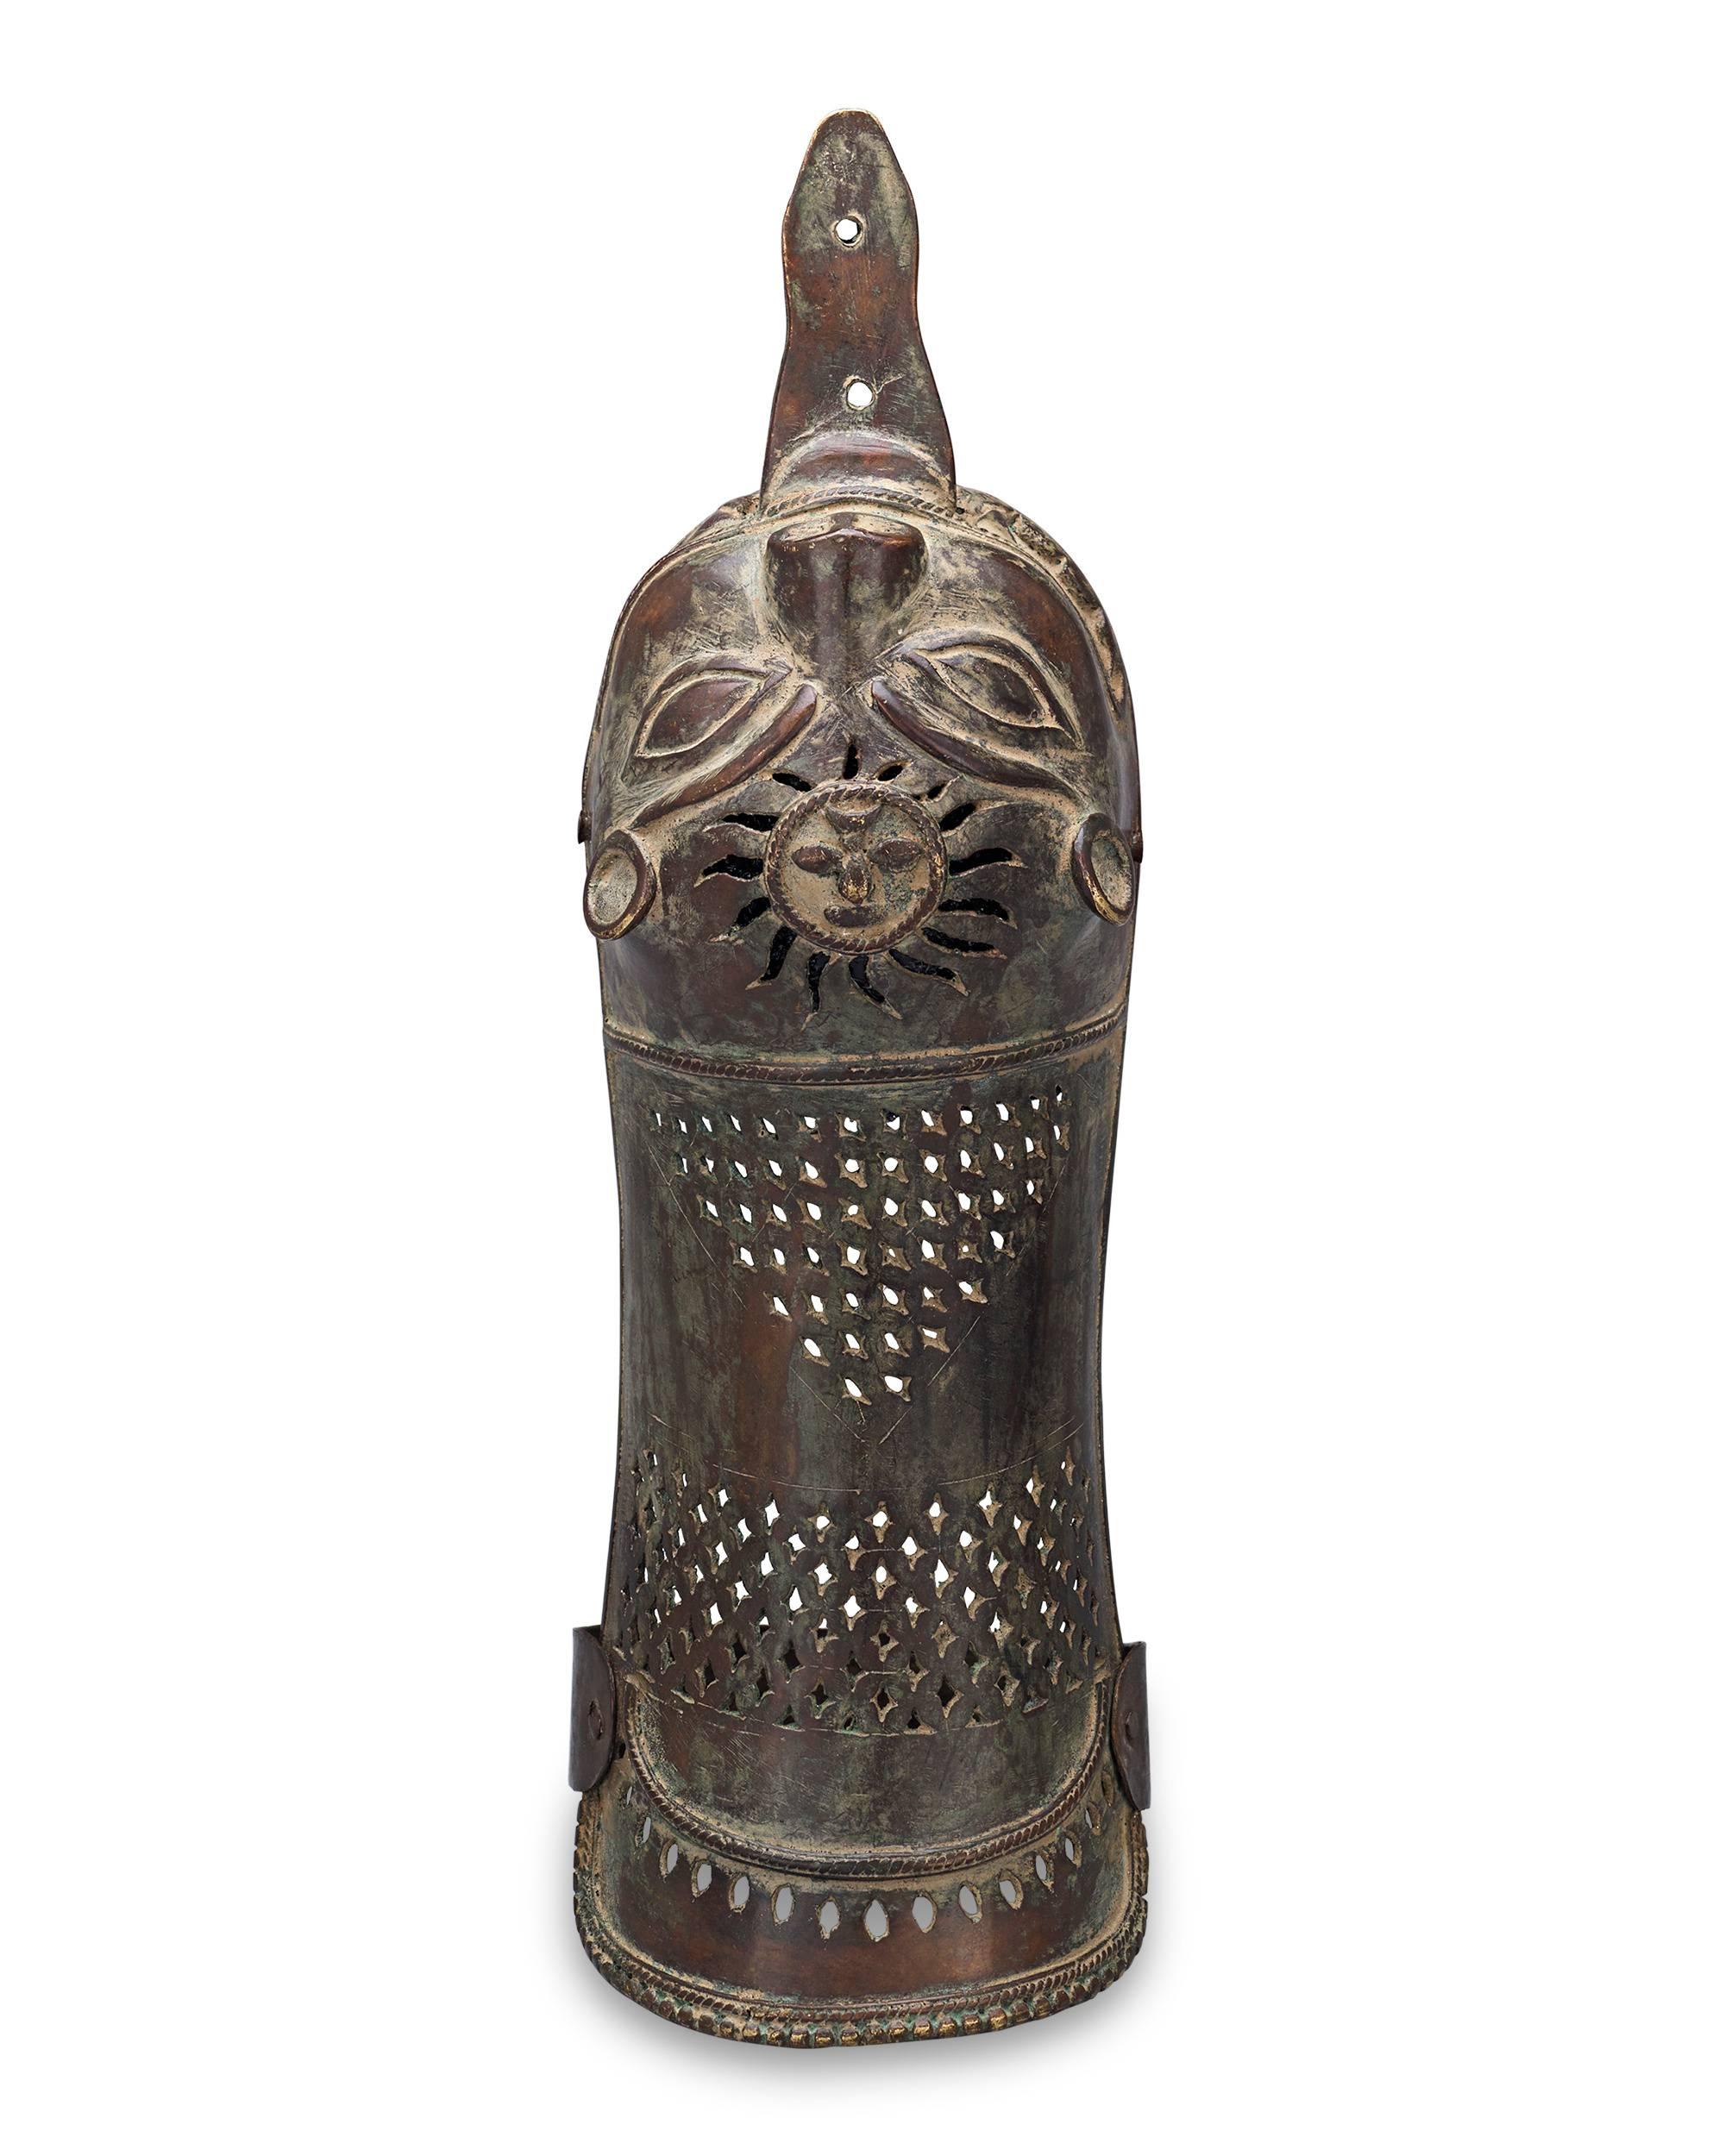 Taking the form of a fierce tiger is this fascinating early 19th century Indian pata gauntlet crafted of bronze. Originating during the Mughal period and used by Maratha warriors, the pata served as a handguard for a sword. Known as a